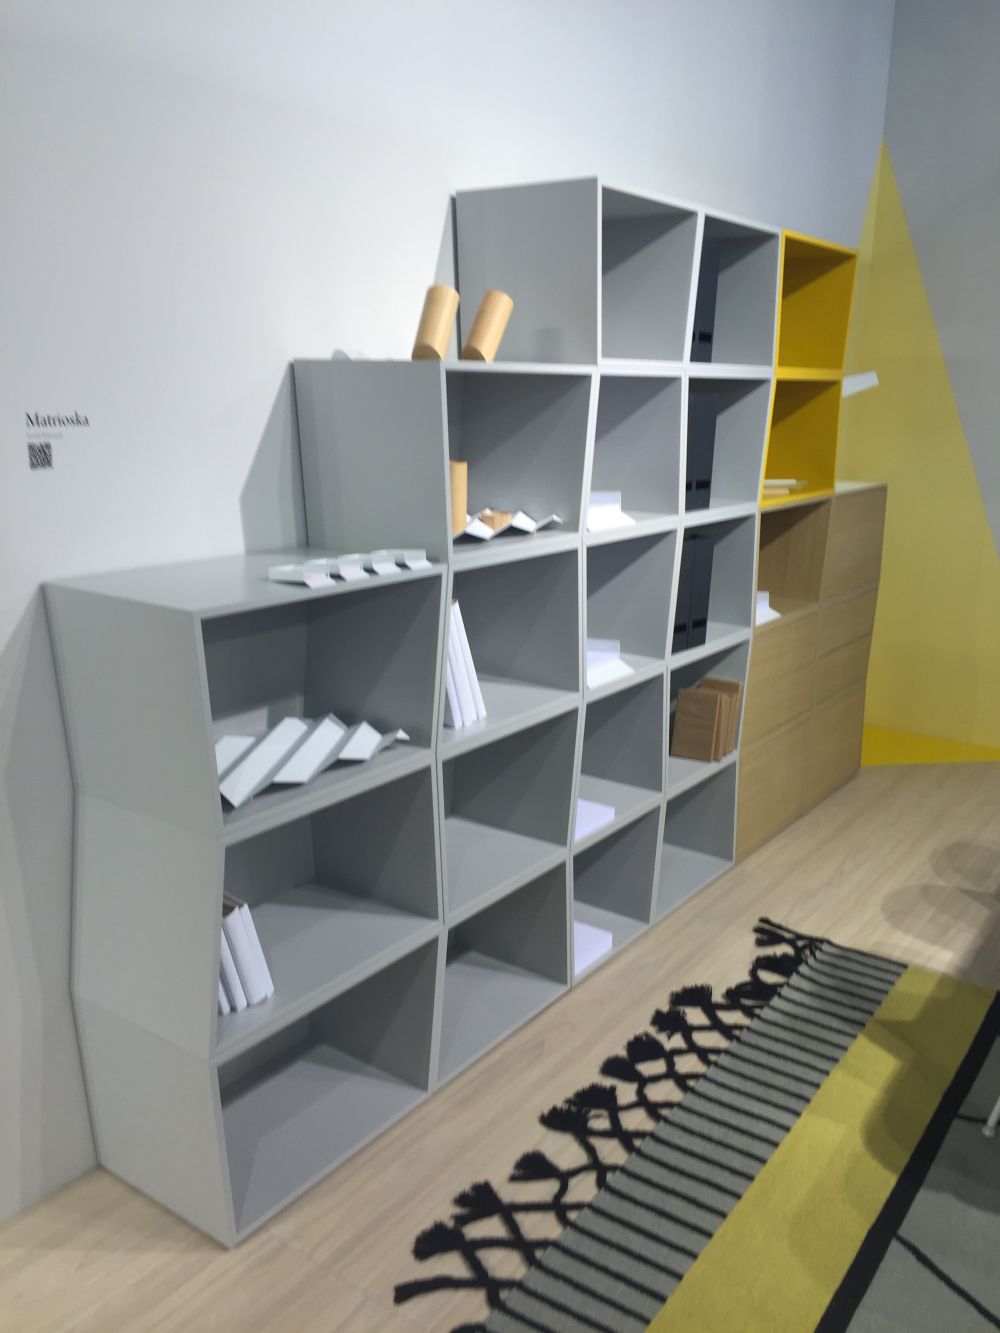 Modular bookcase in yellow green and gray